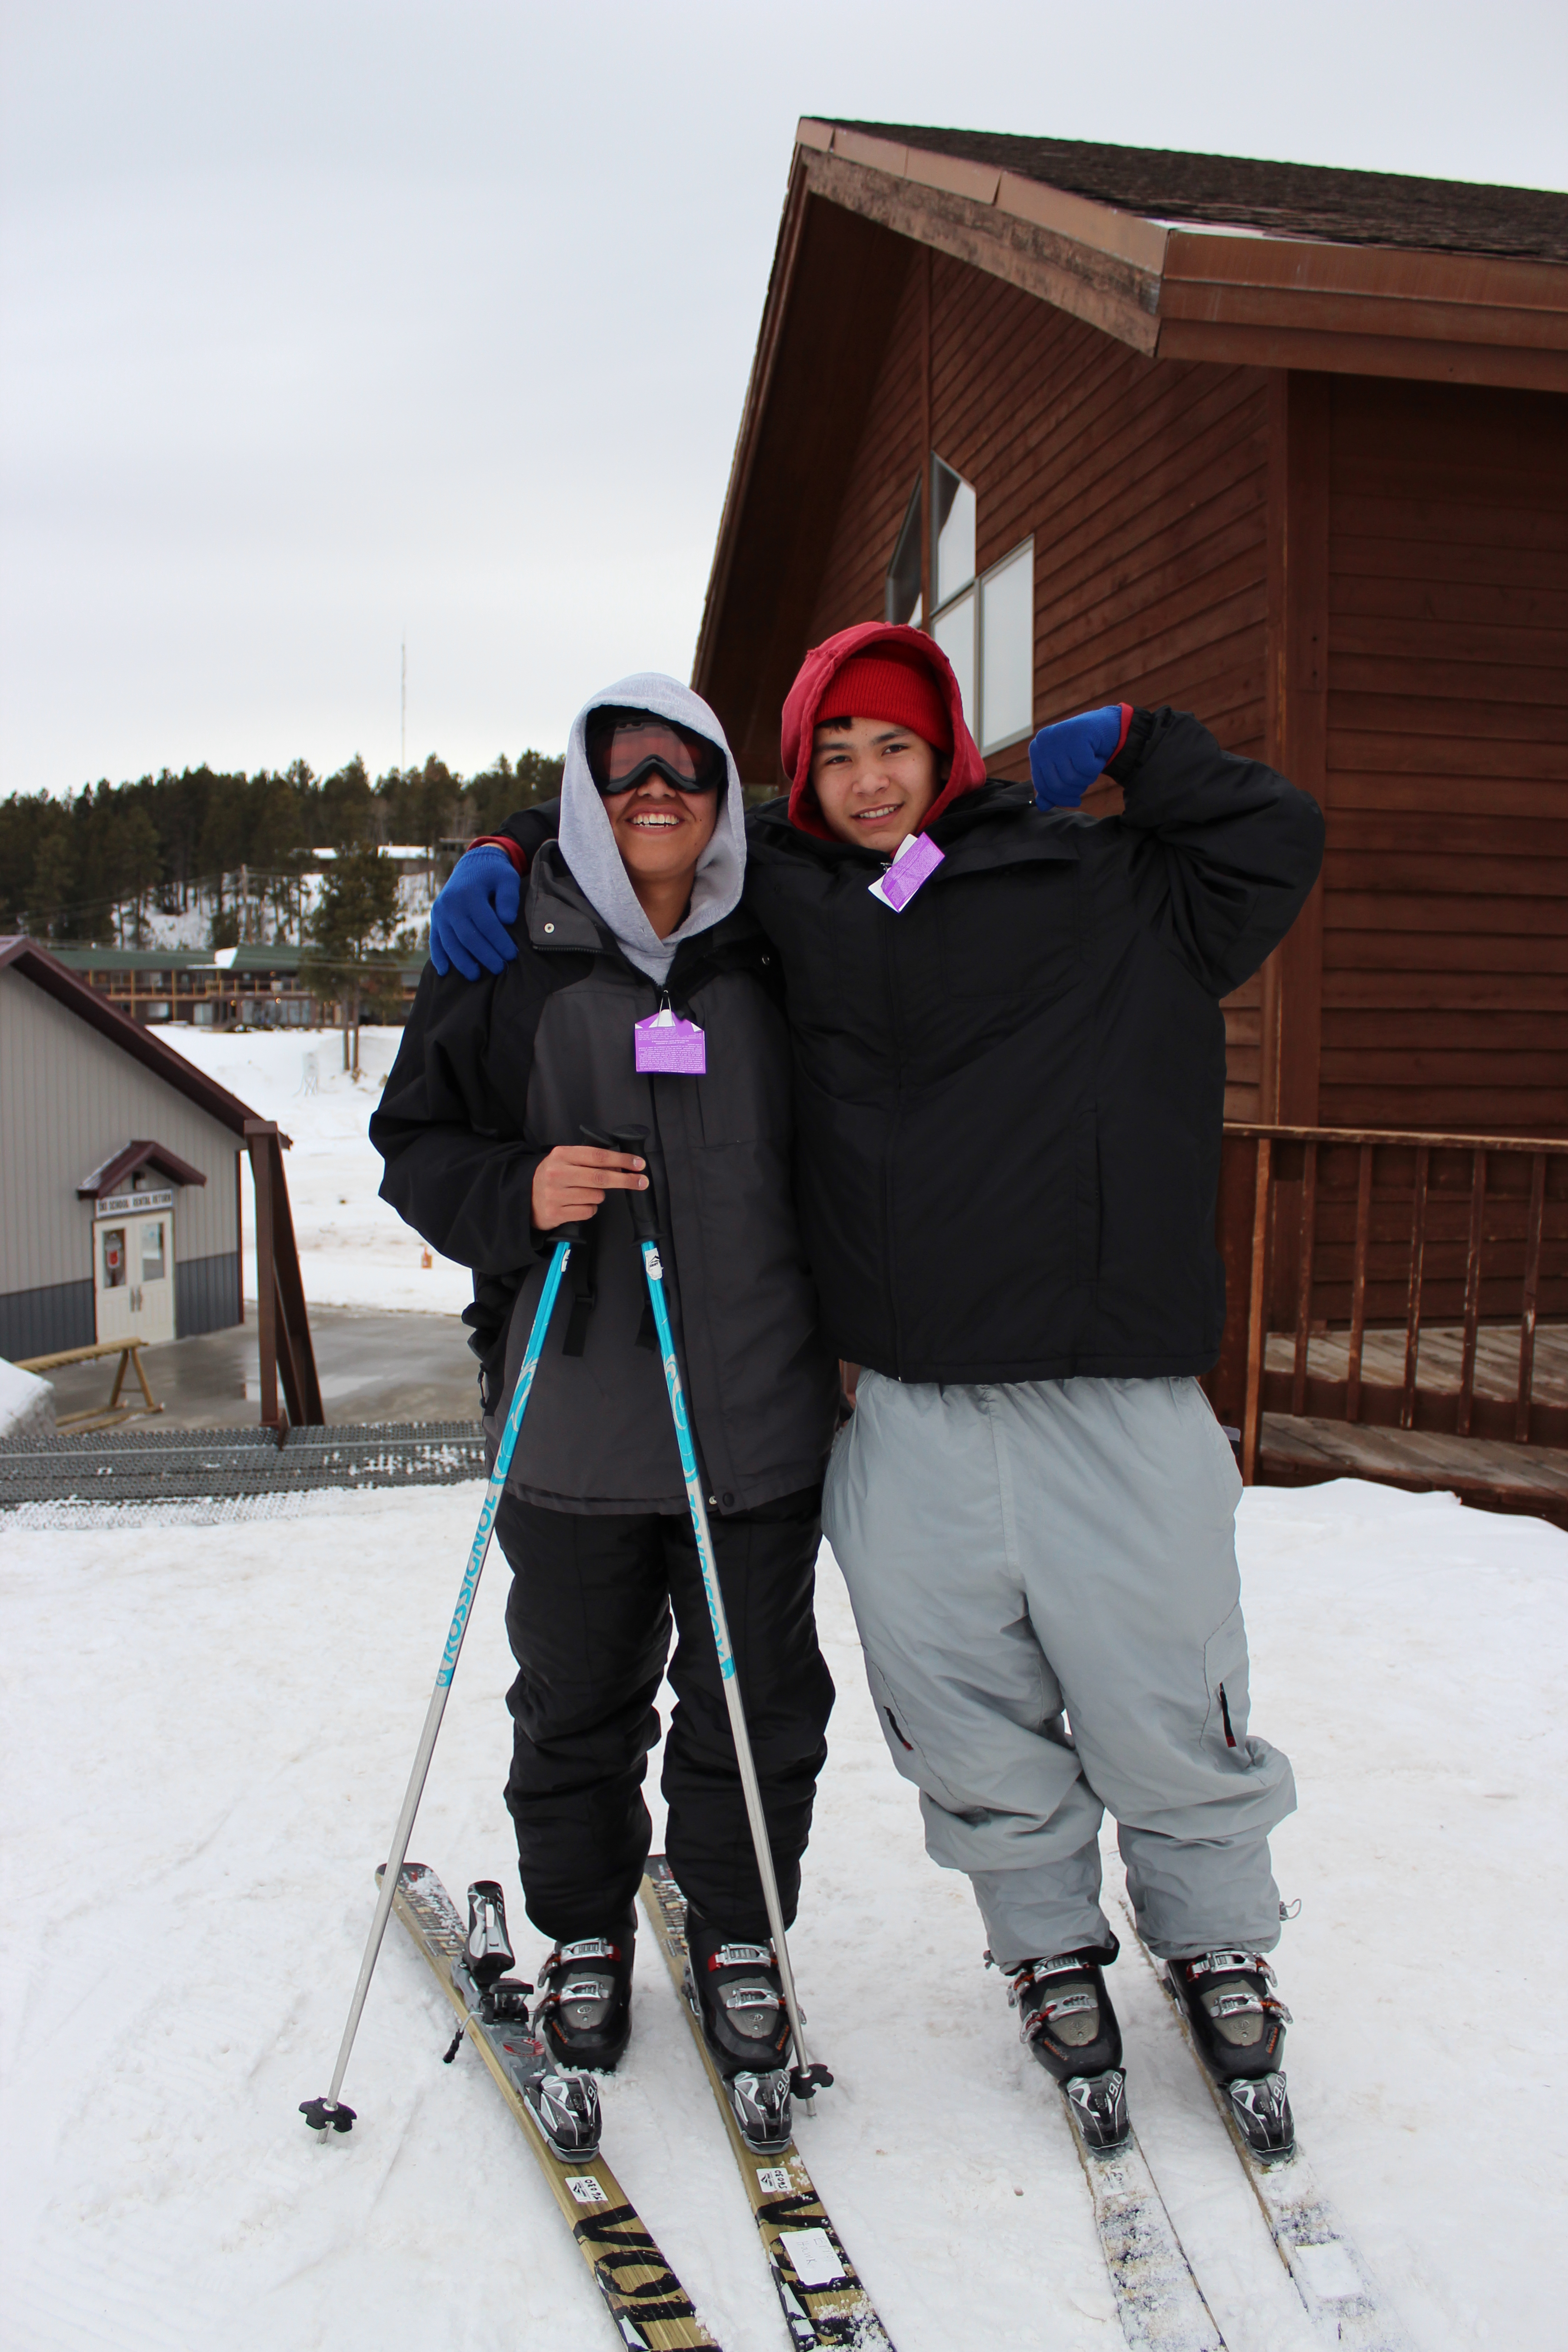 Two boys posing for a picture while on the slopes.